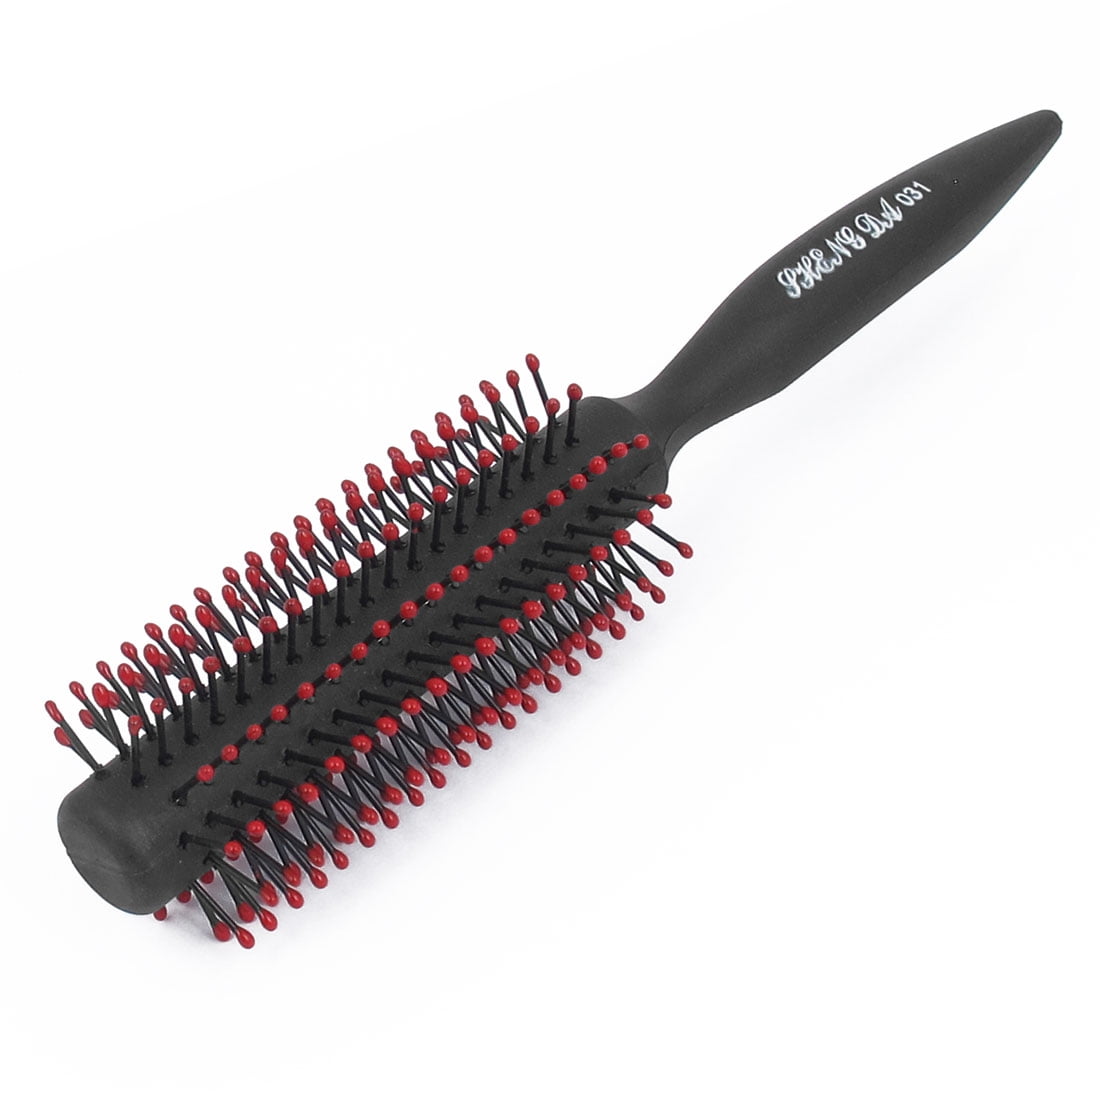 Bossman THE CLAW Round Hair Brush Cleaner Tool 3 Inch - Cleans Boar  Bristle, Wave or Plastic Brushes and Combs - Black Hairbrush Cleaning Rake  - Cat